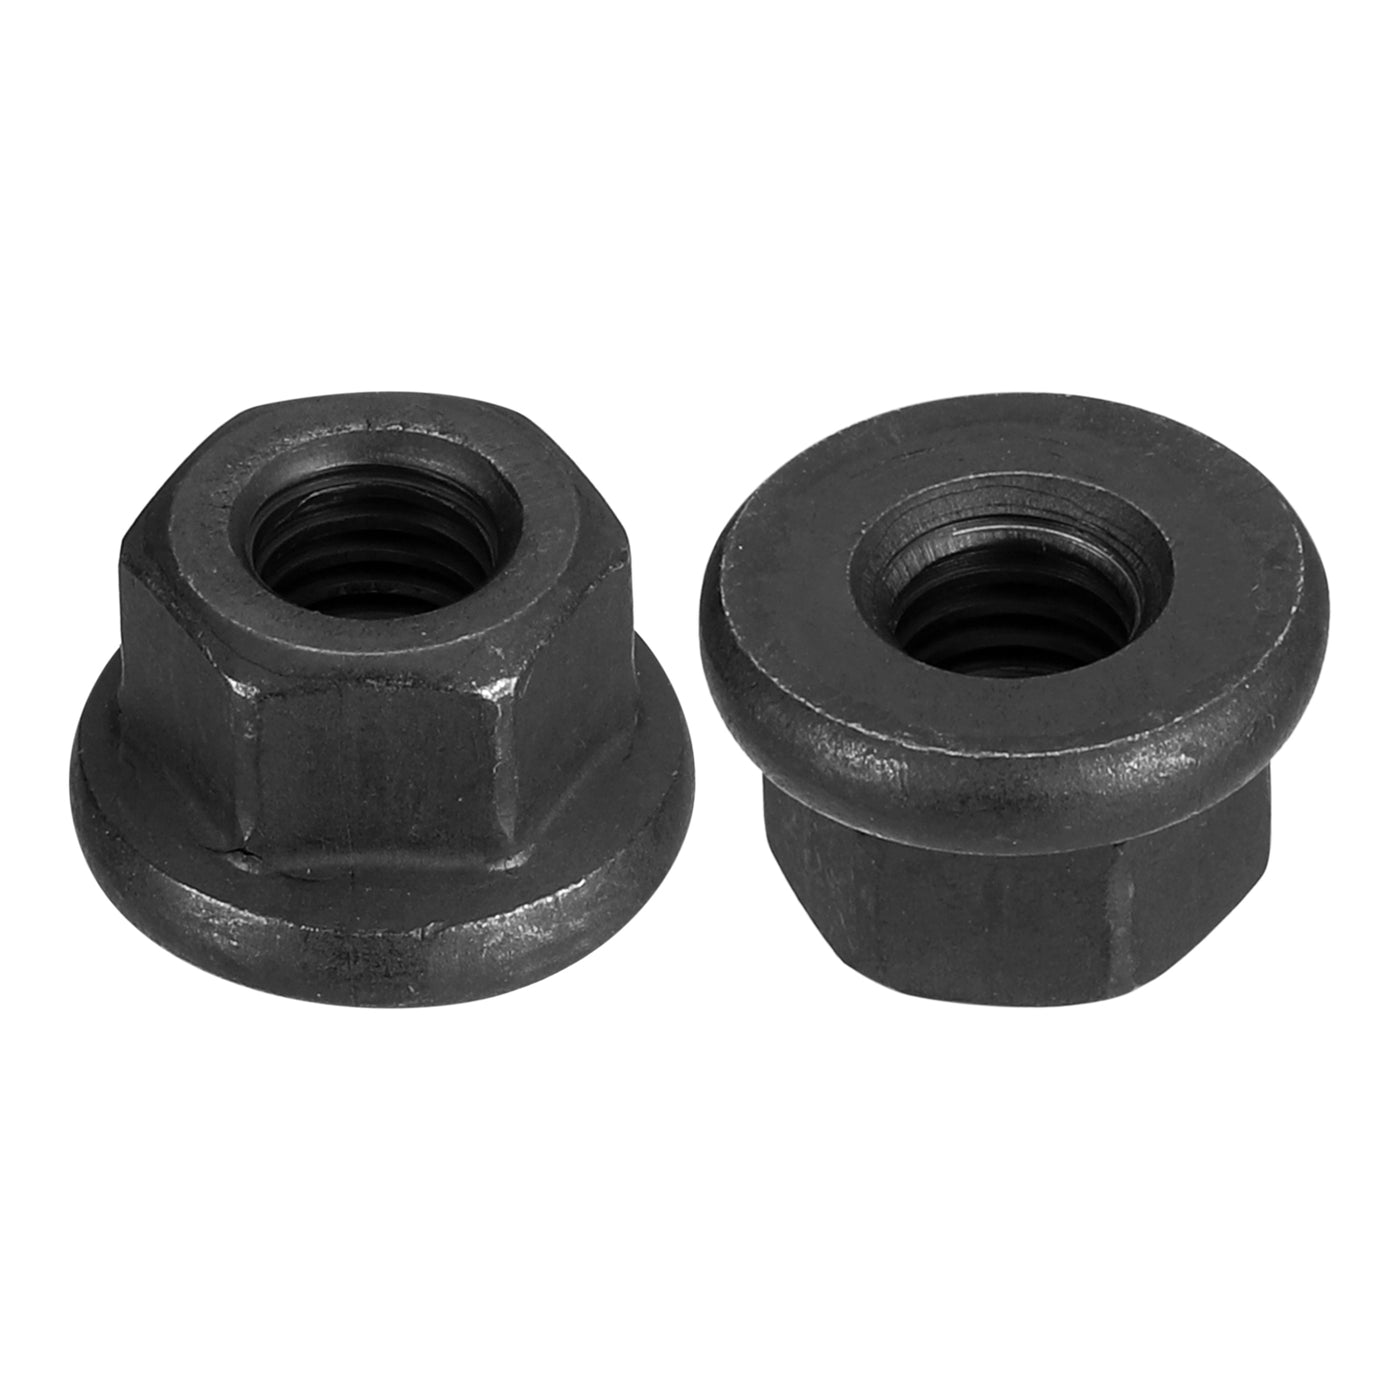 uxcell Uxcell M8 Flange Hex Lock Nuts, 2pcs Grade 12.9 Carbon Steel Hex Flange Nuts